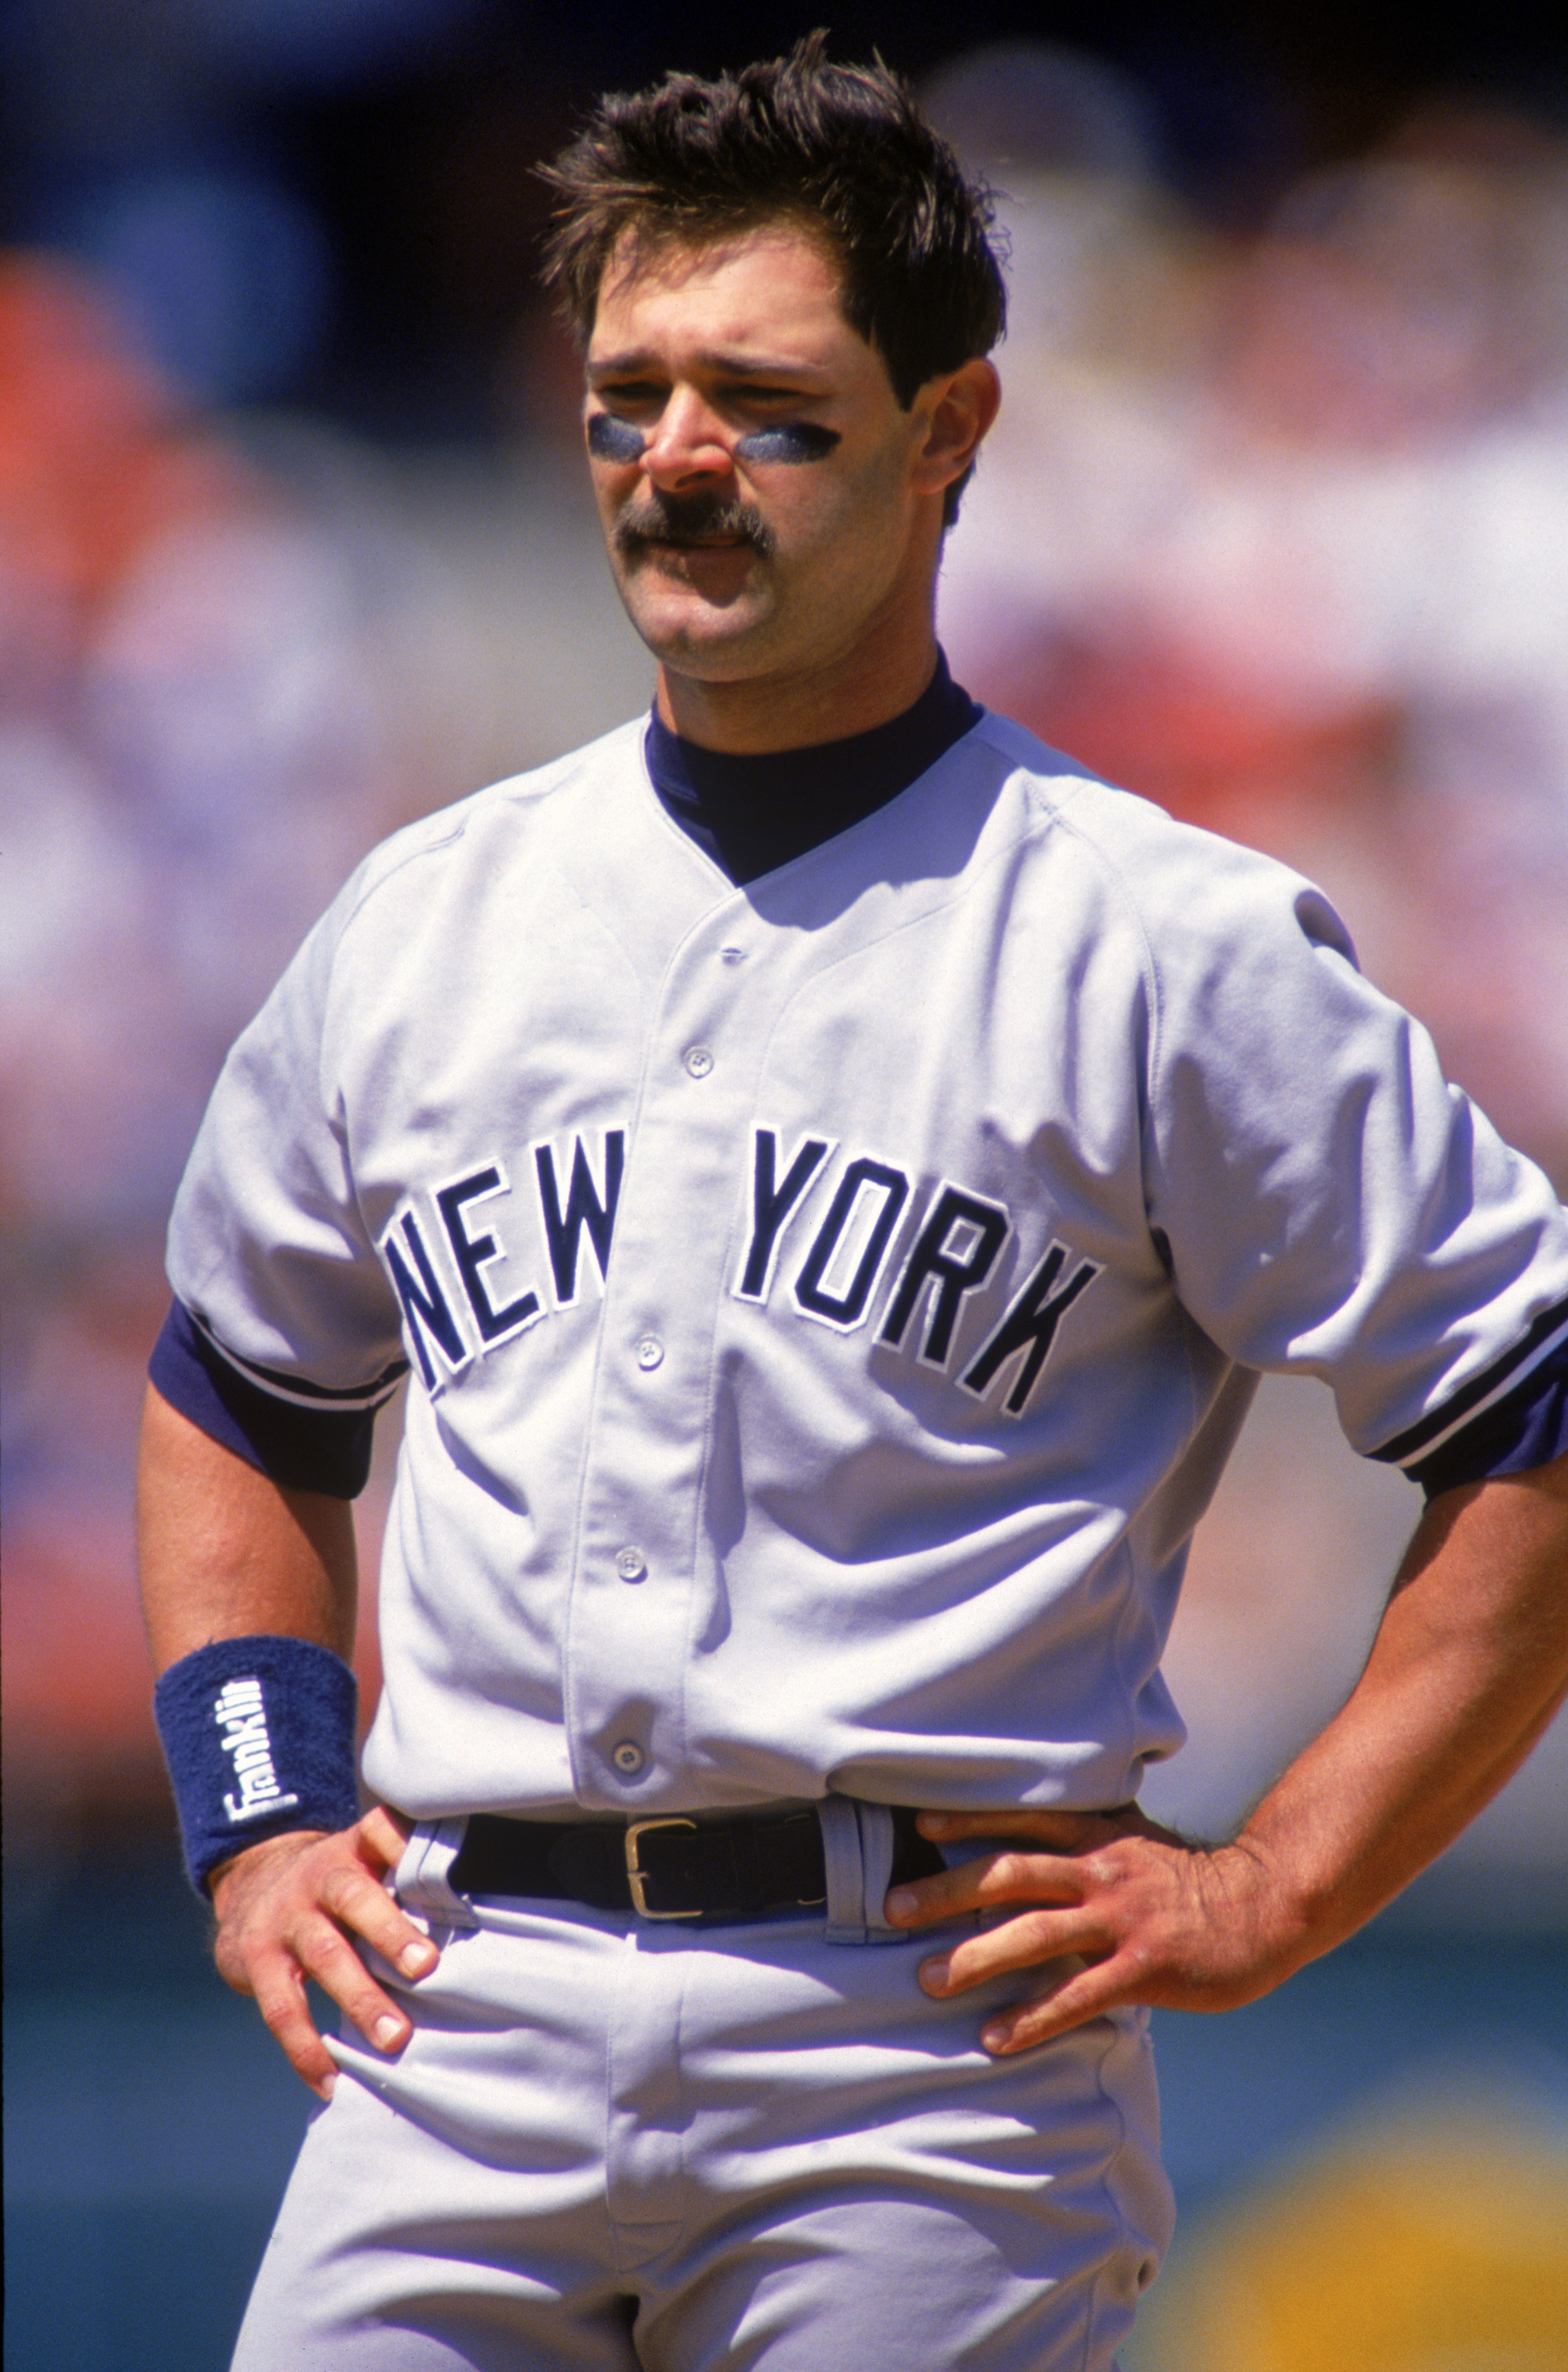 OAKLAND, CA - APRIL 30:  Don Mattingly #23 of the New York Yankees looks on as he stand on the field during a game against the Oakland Athletics at Oakland-Alameda County Coliseum on April 30, 1994 in Oakland, California.  (Photo by Otto Greule Jr/Getty I